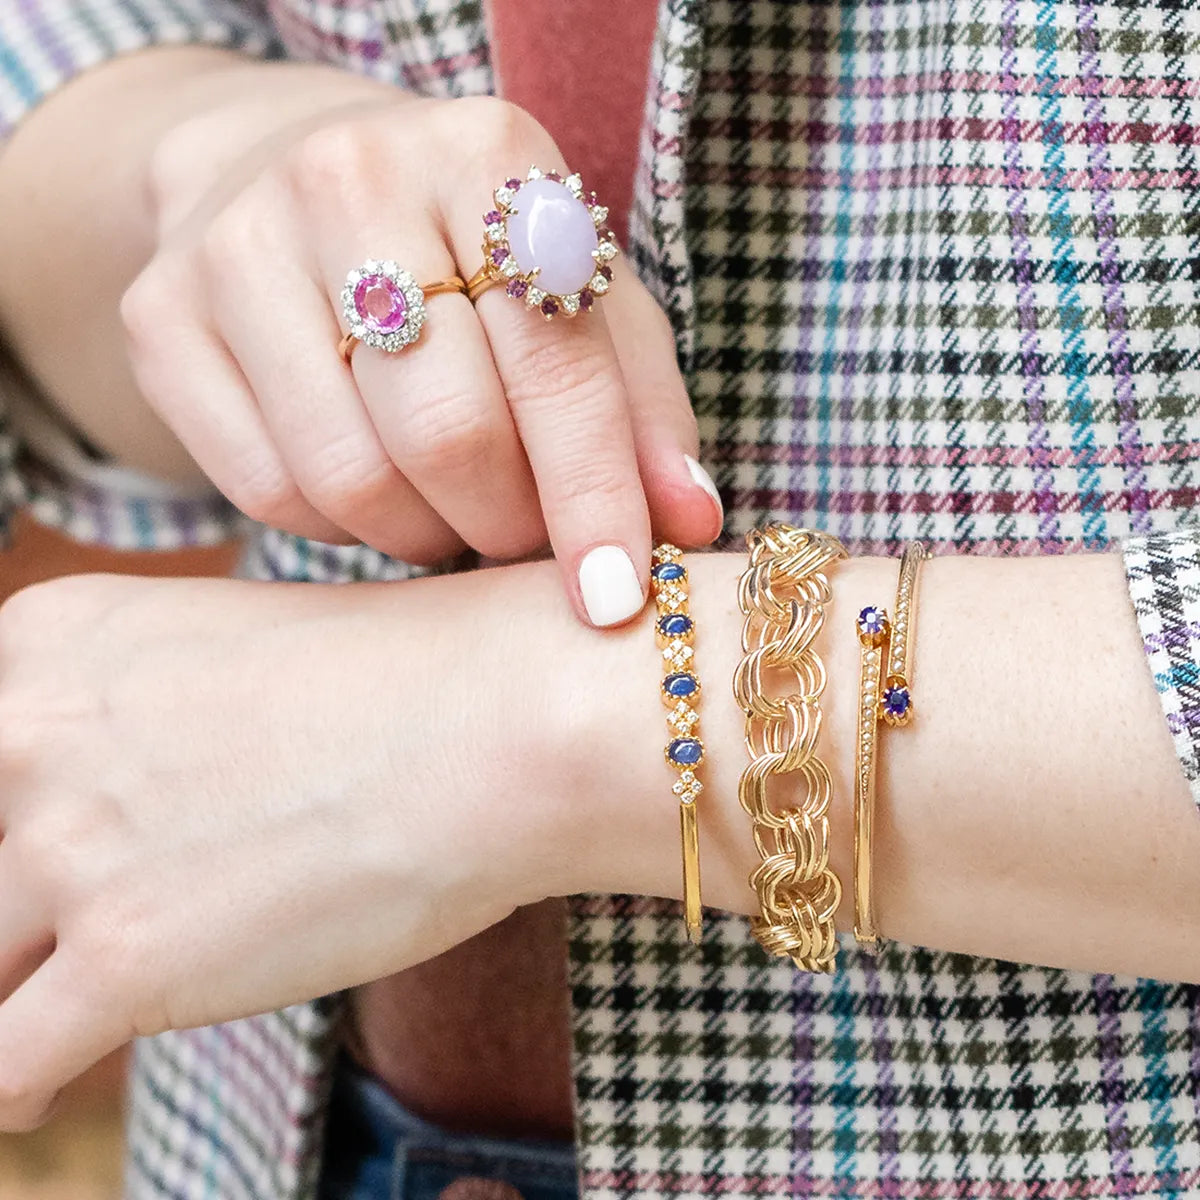 How to Shop for Antique and Vintage Jewelry Like a Pro